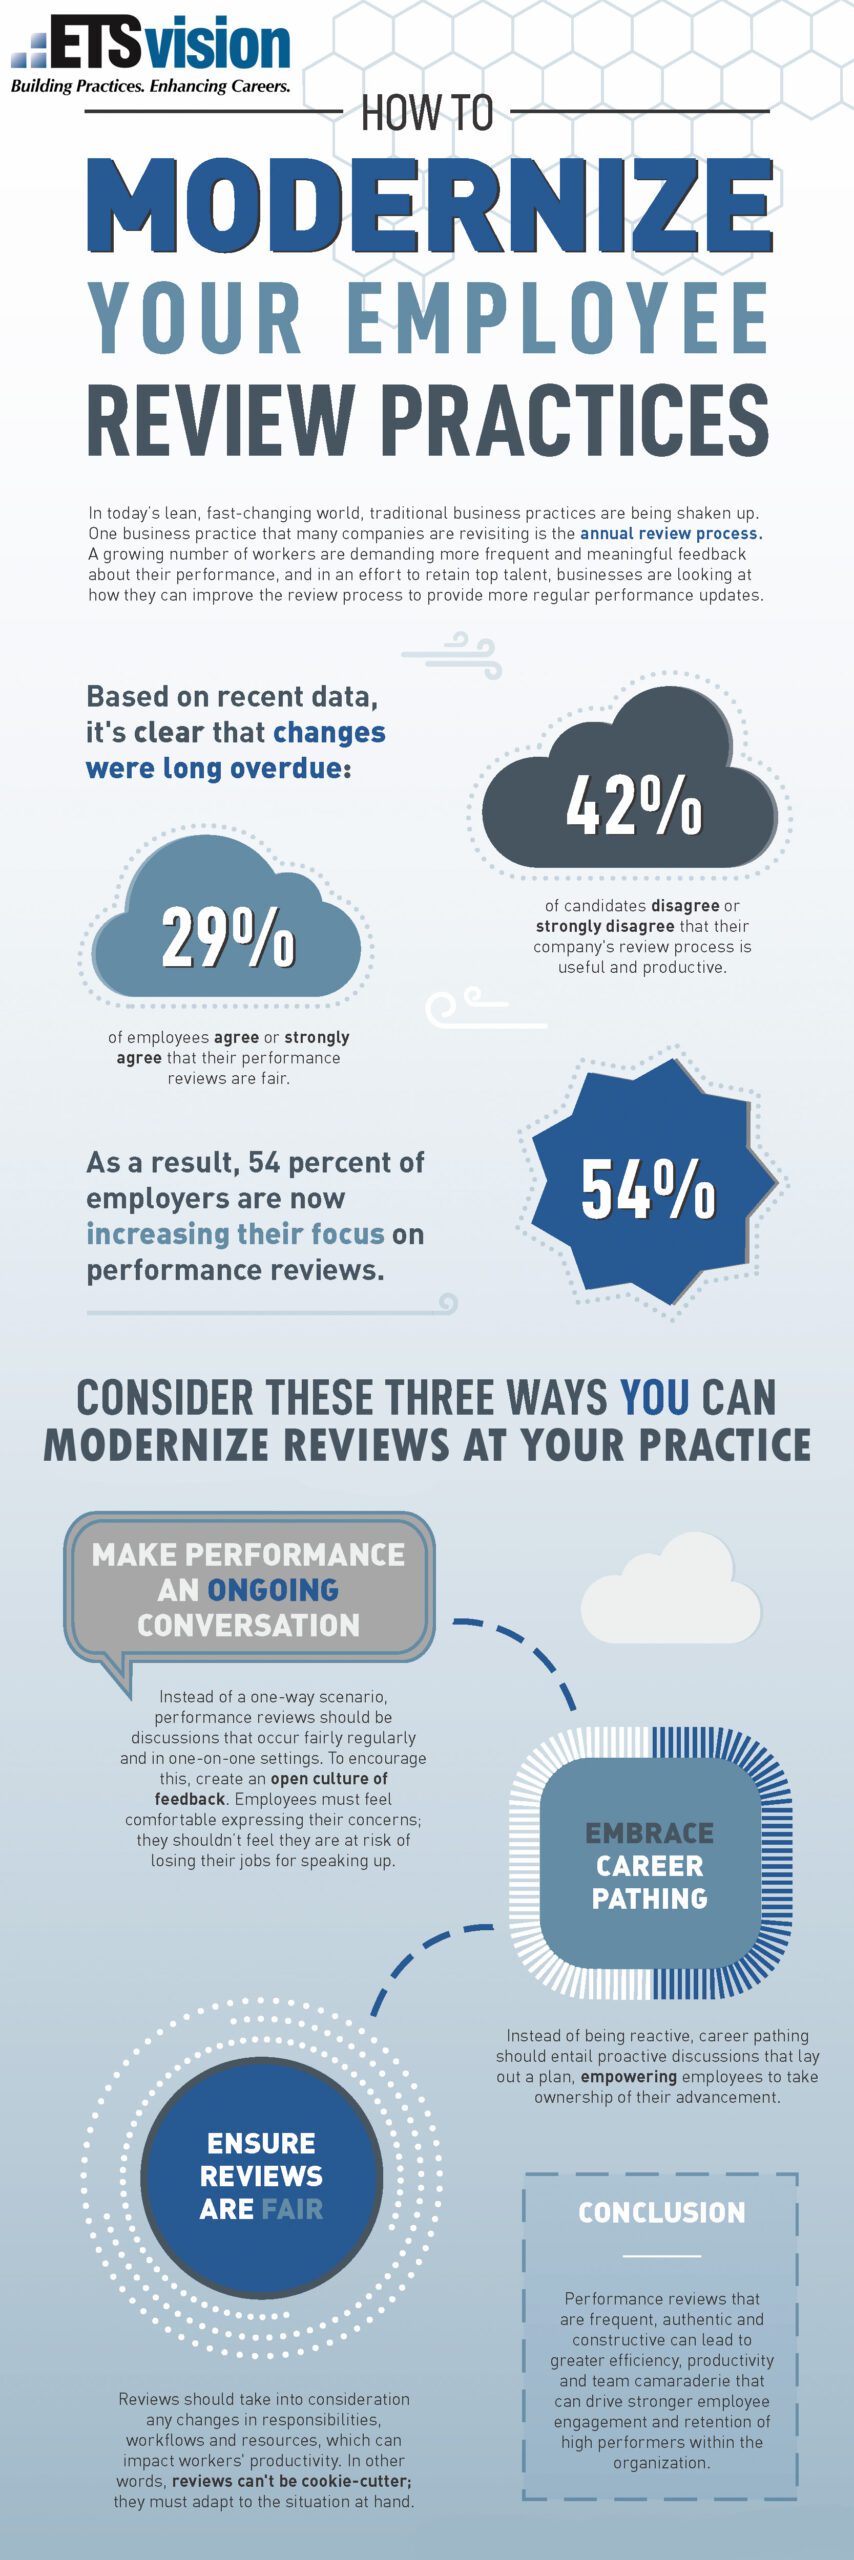 Infographic: How to Modernize Your Employee Review Practices